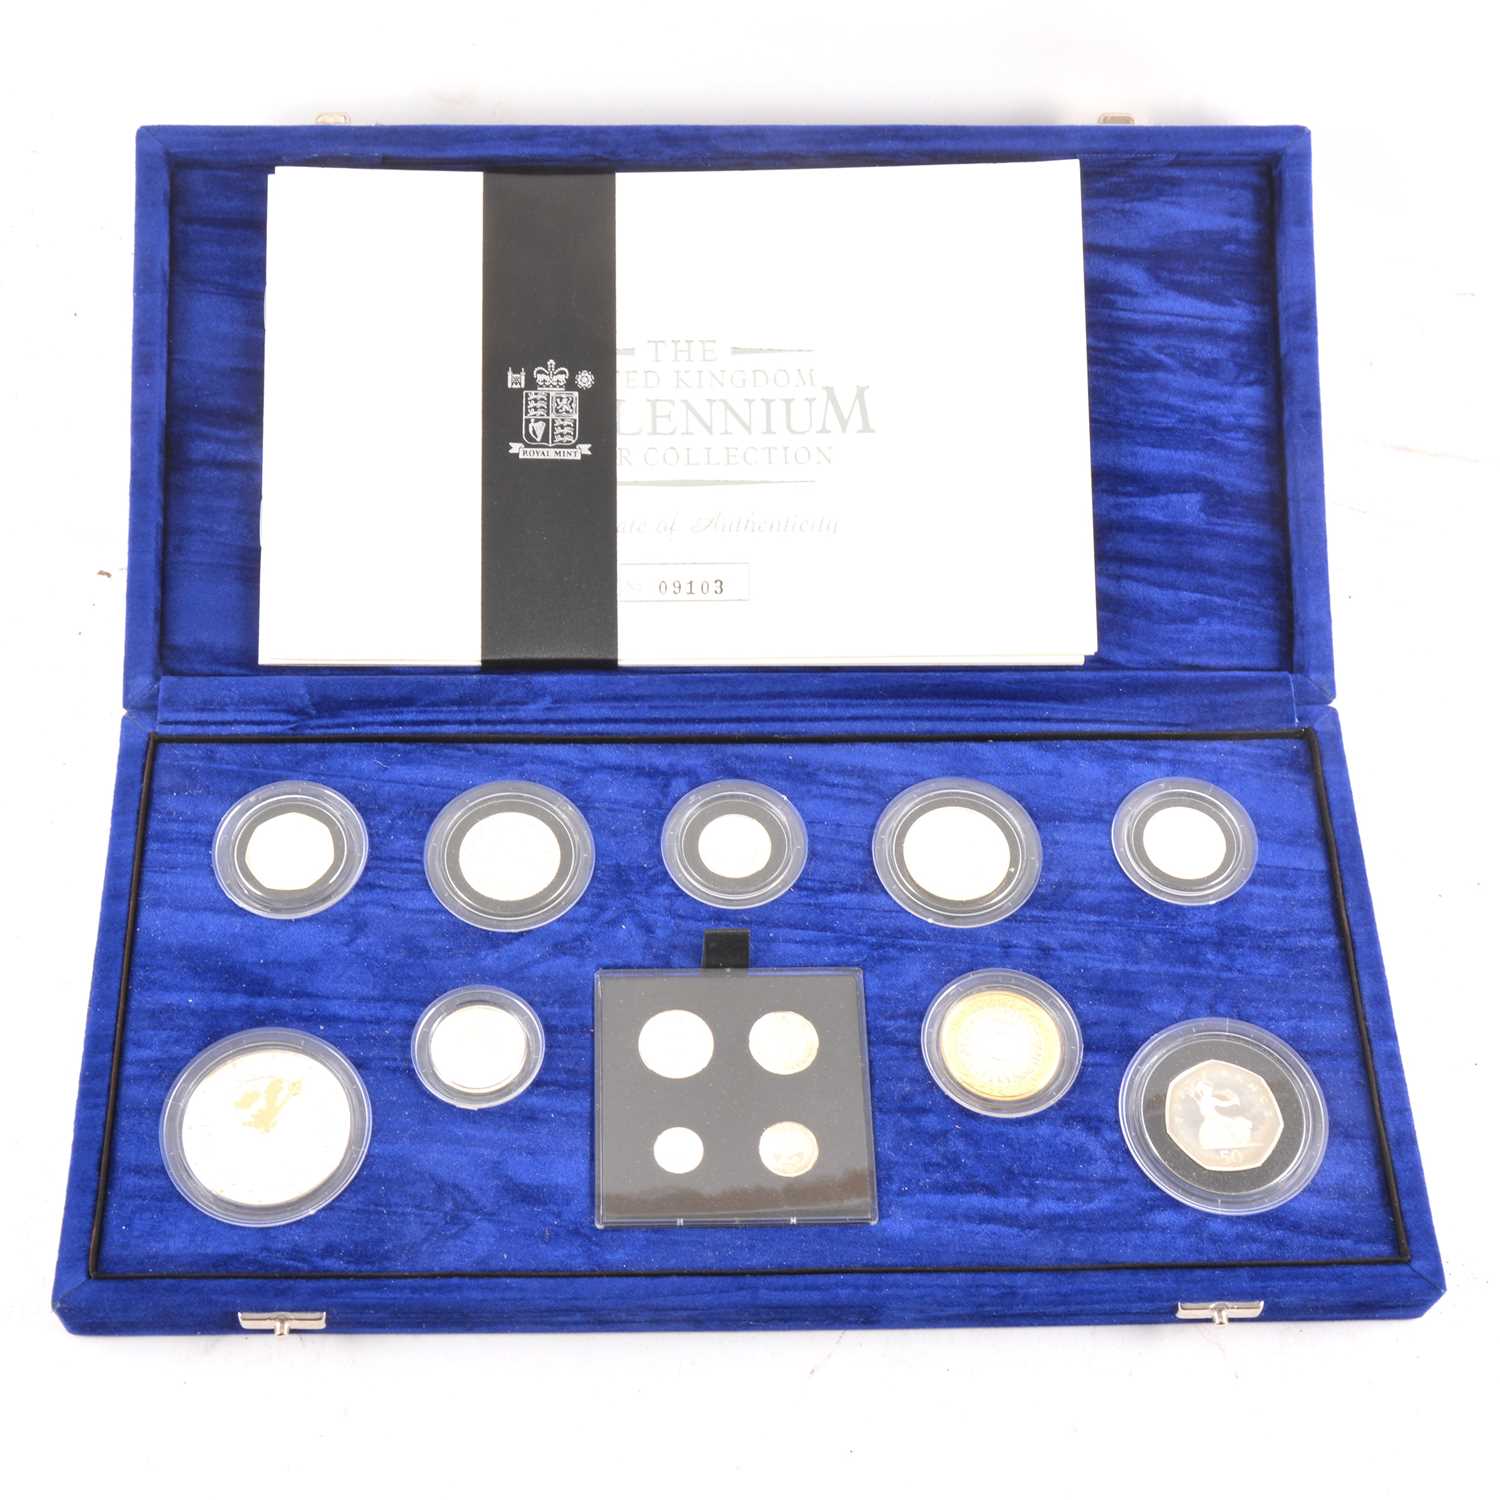 Lot 172 - The United Kingdom Millennium Silver Collection by The Royal Mint.